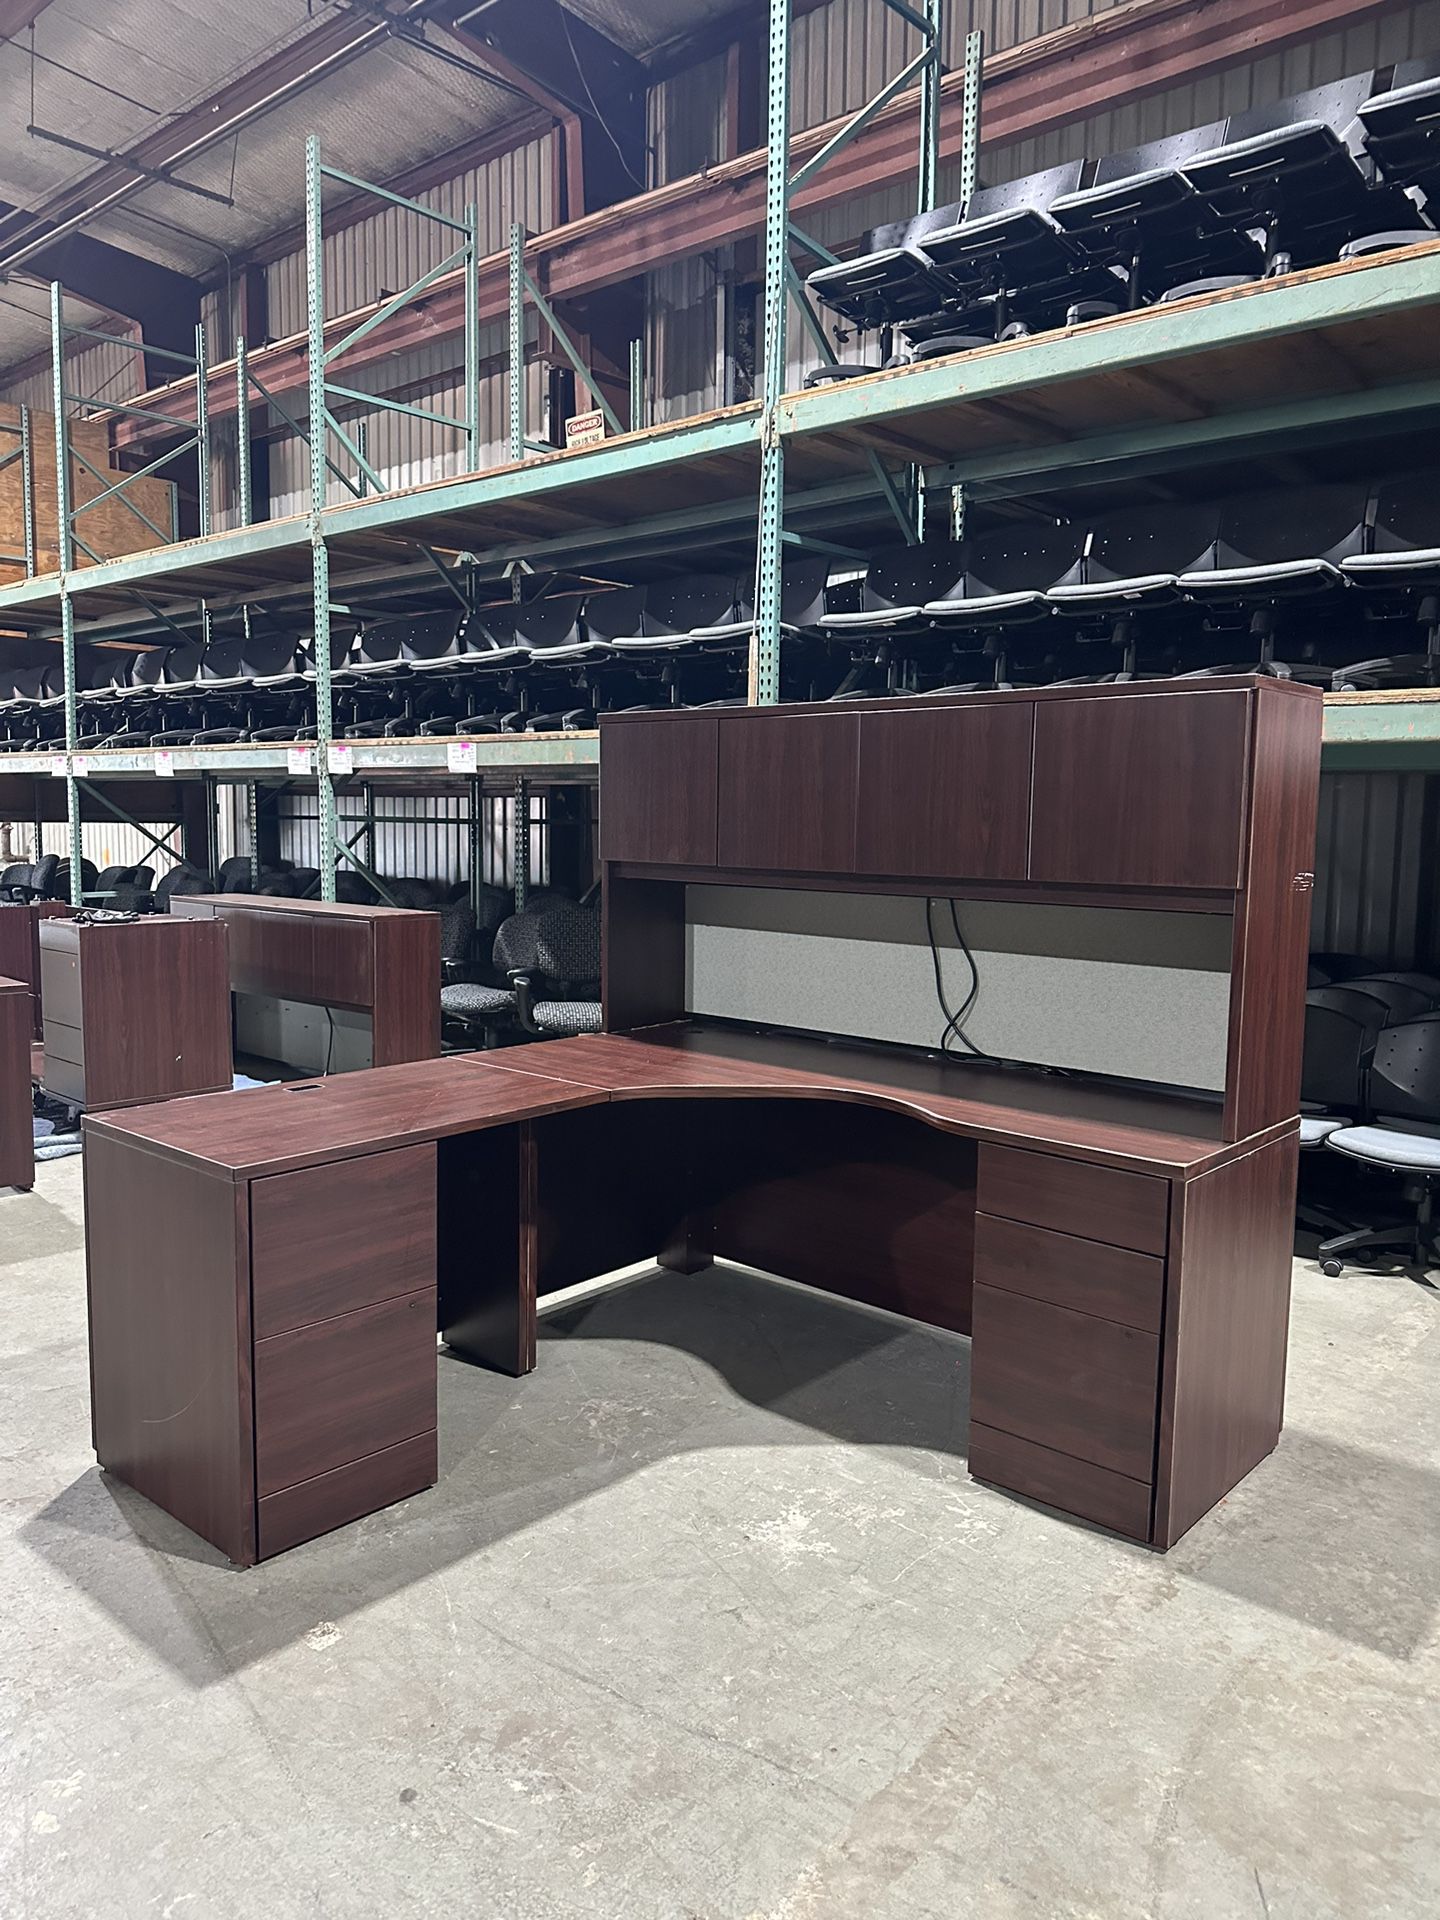 OFFICE/HOME DESK L-SHAPE DESK WITH HUTCH 